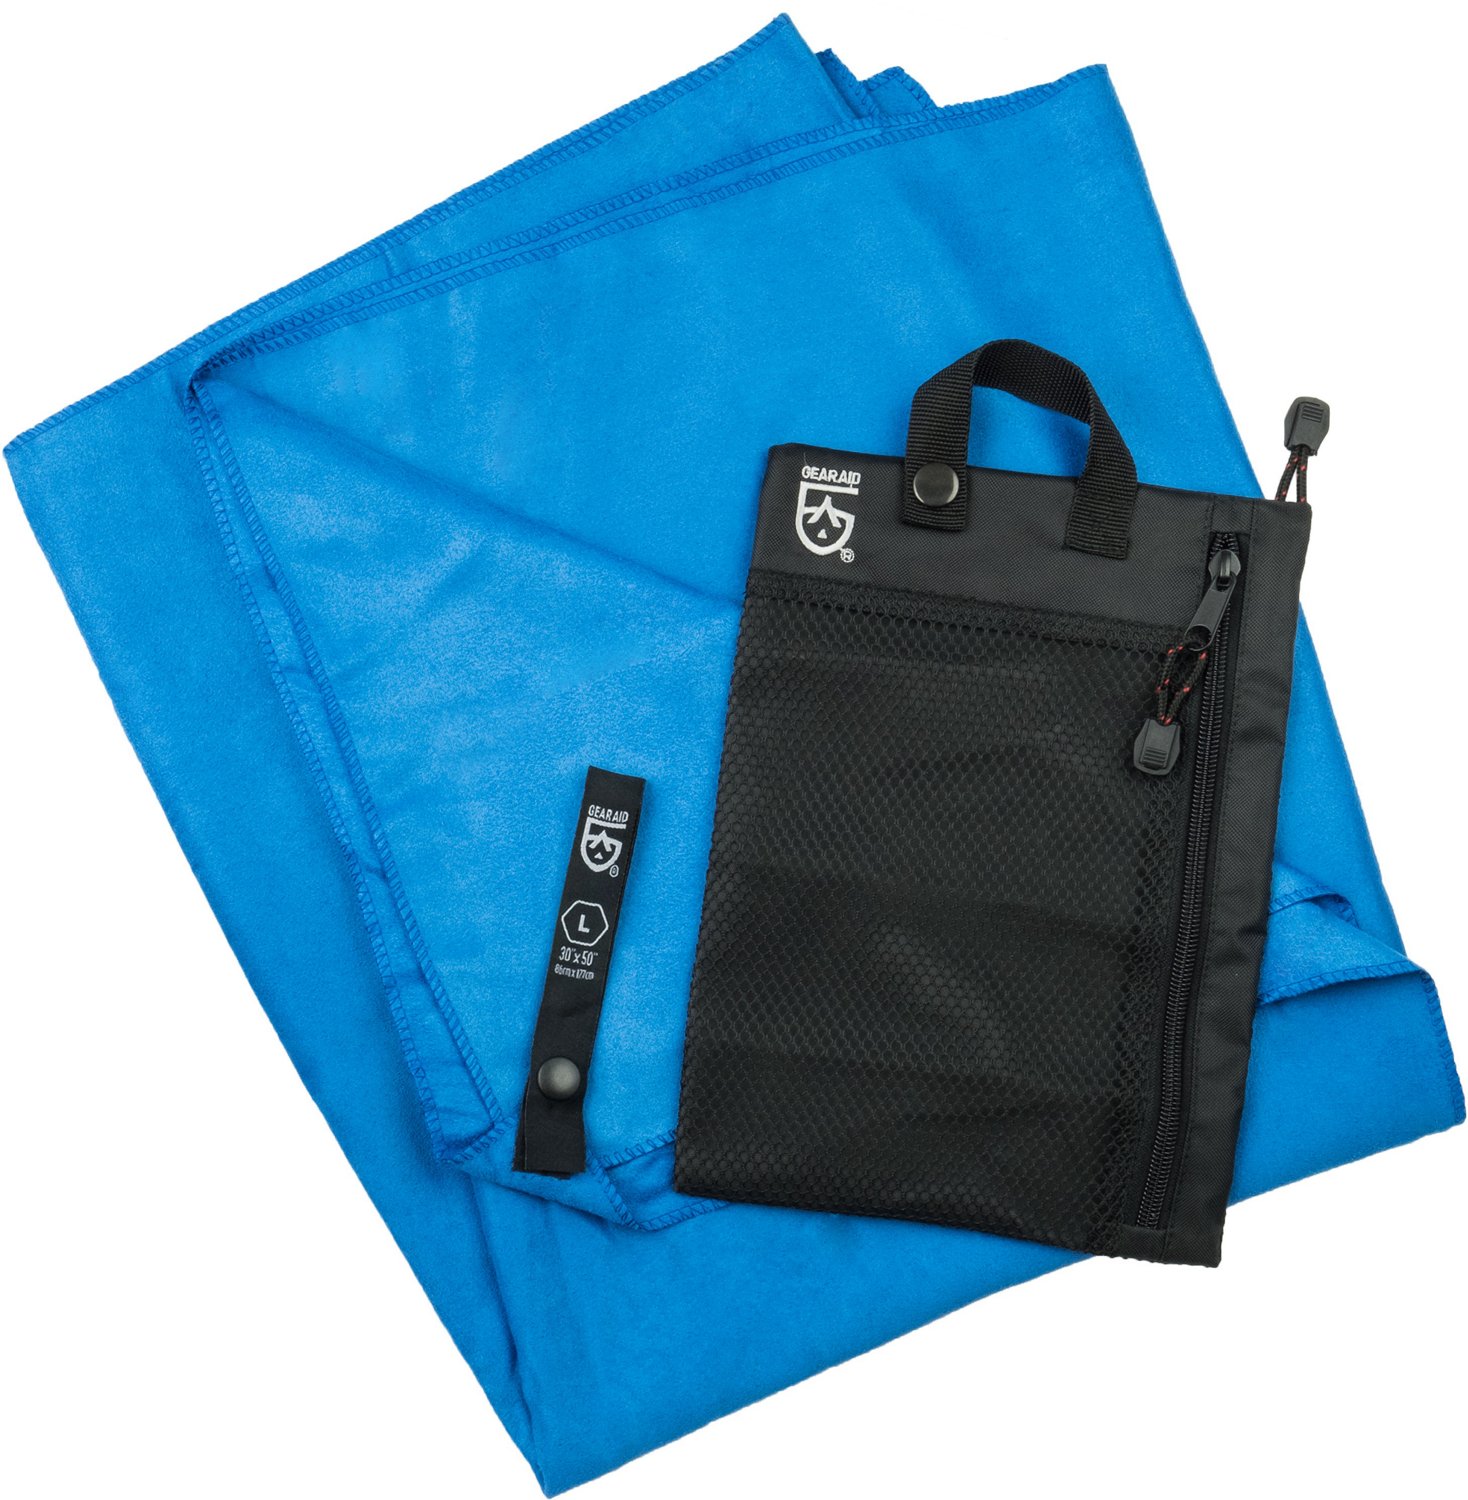 Gear Aid Quick Dry L Microfiber Towel | Free Shipping at Academy